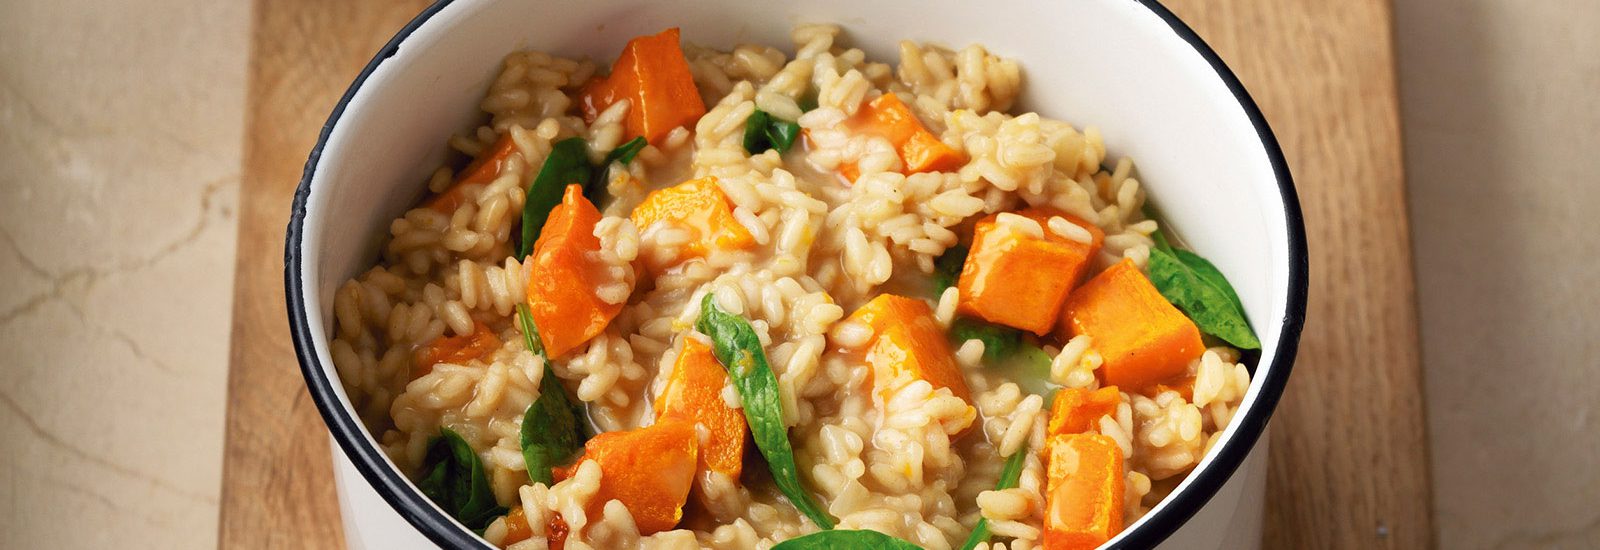 Roasted Pumpkin And Spinach Risotto